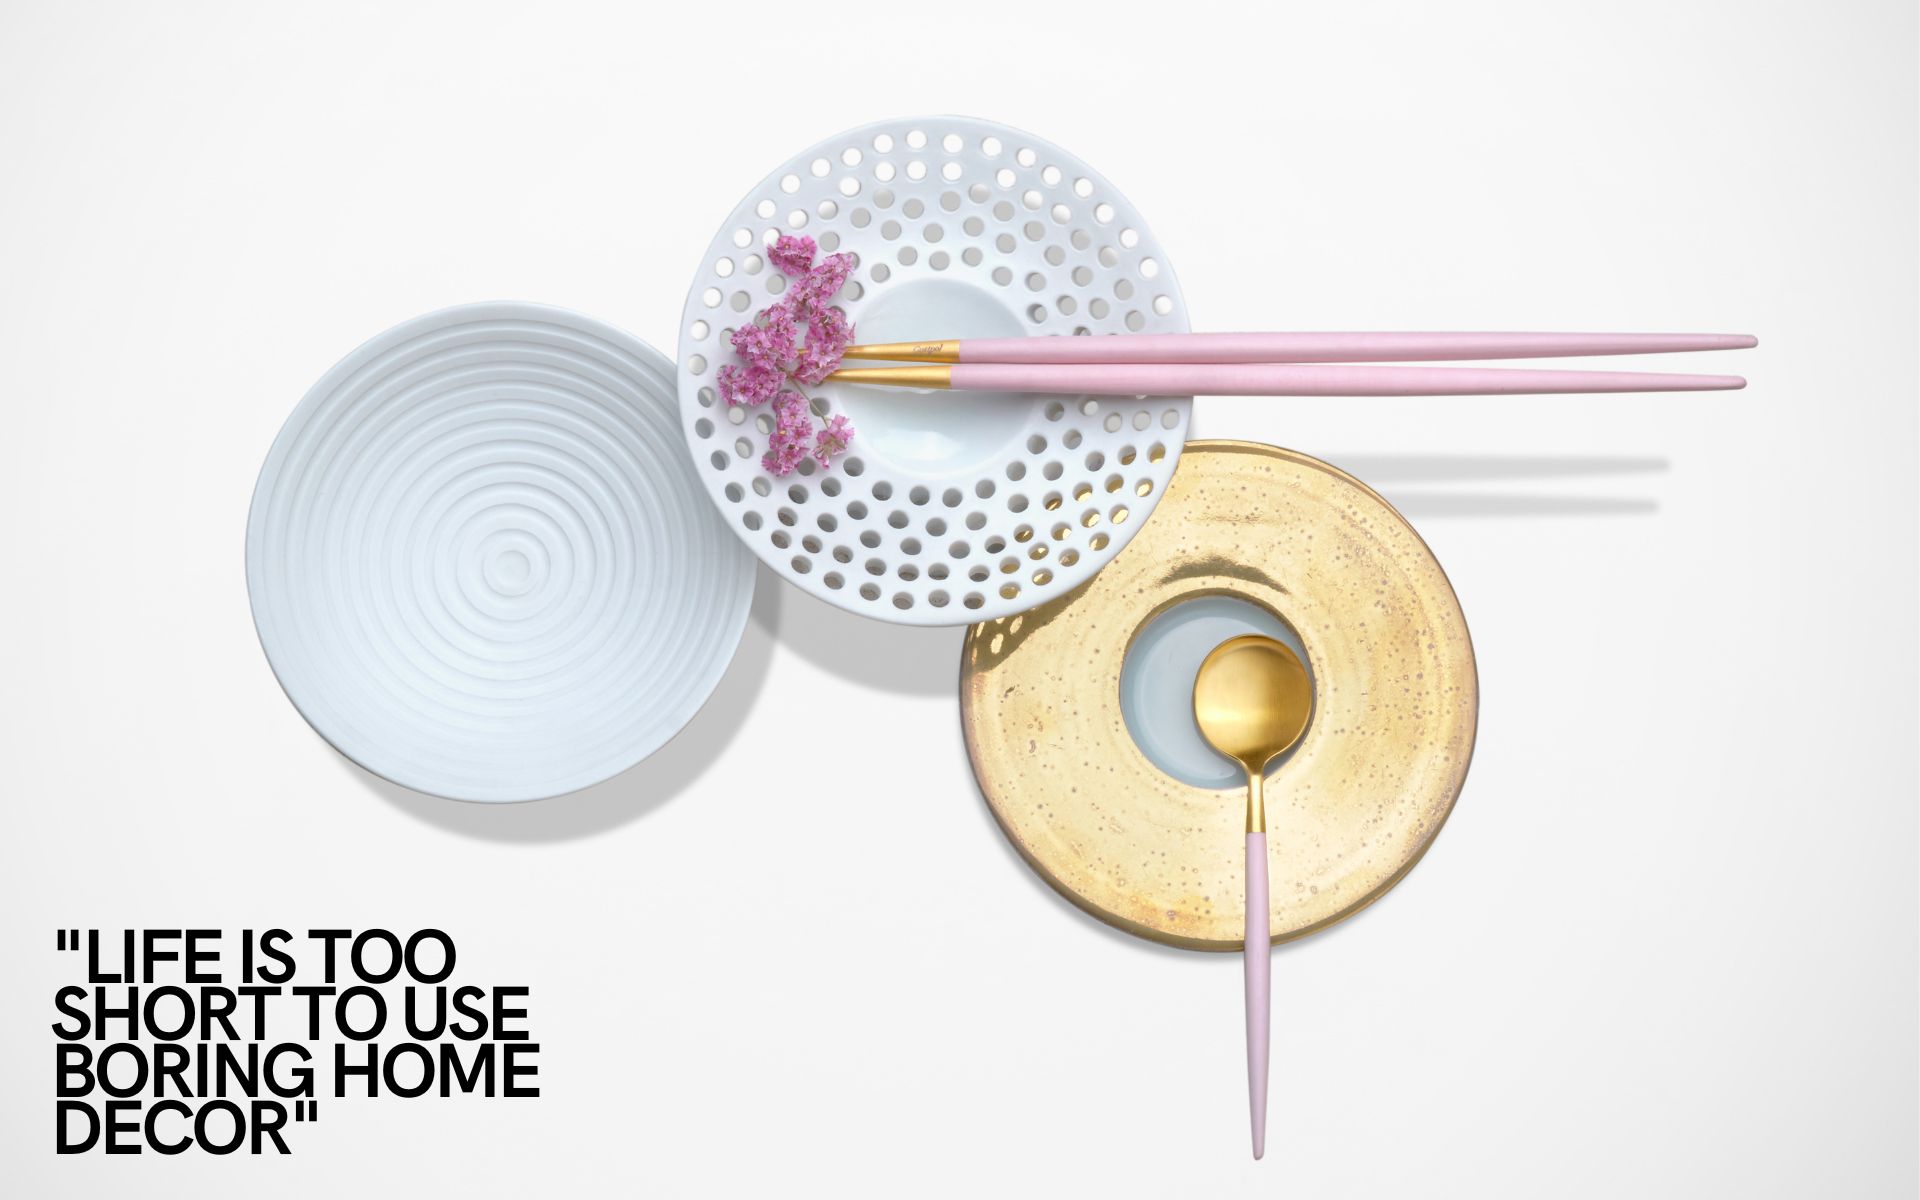 Shop luxury home decor object. Discover new homeware for new season.